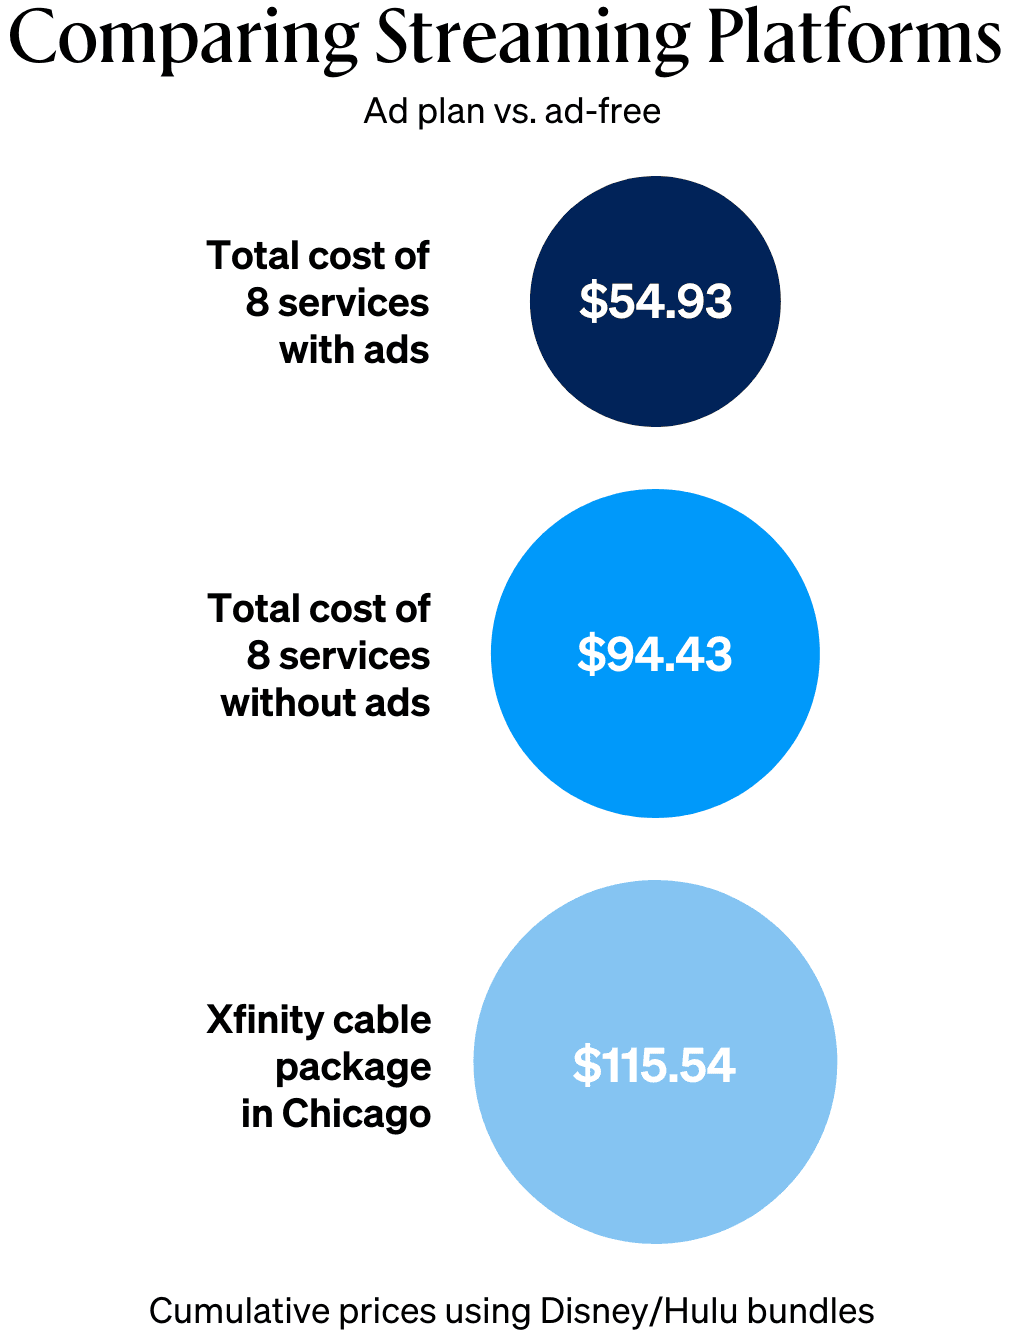 How the price of cable compares to streaming. Compares the total cost of 8 services with ads, total cost of 8 services without ads, and Xfinity cable package in Chicago in three circles in various shades of blue.